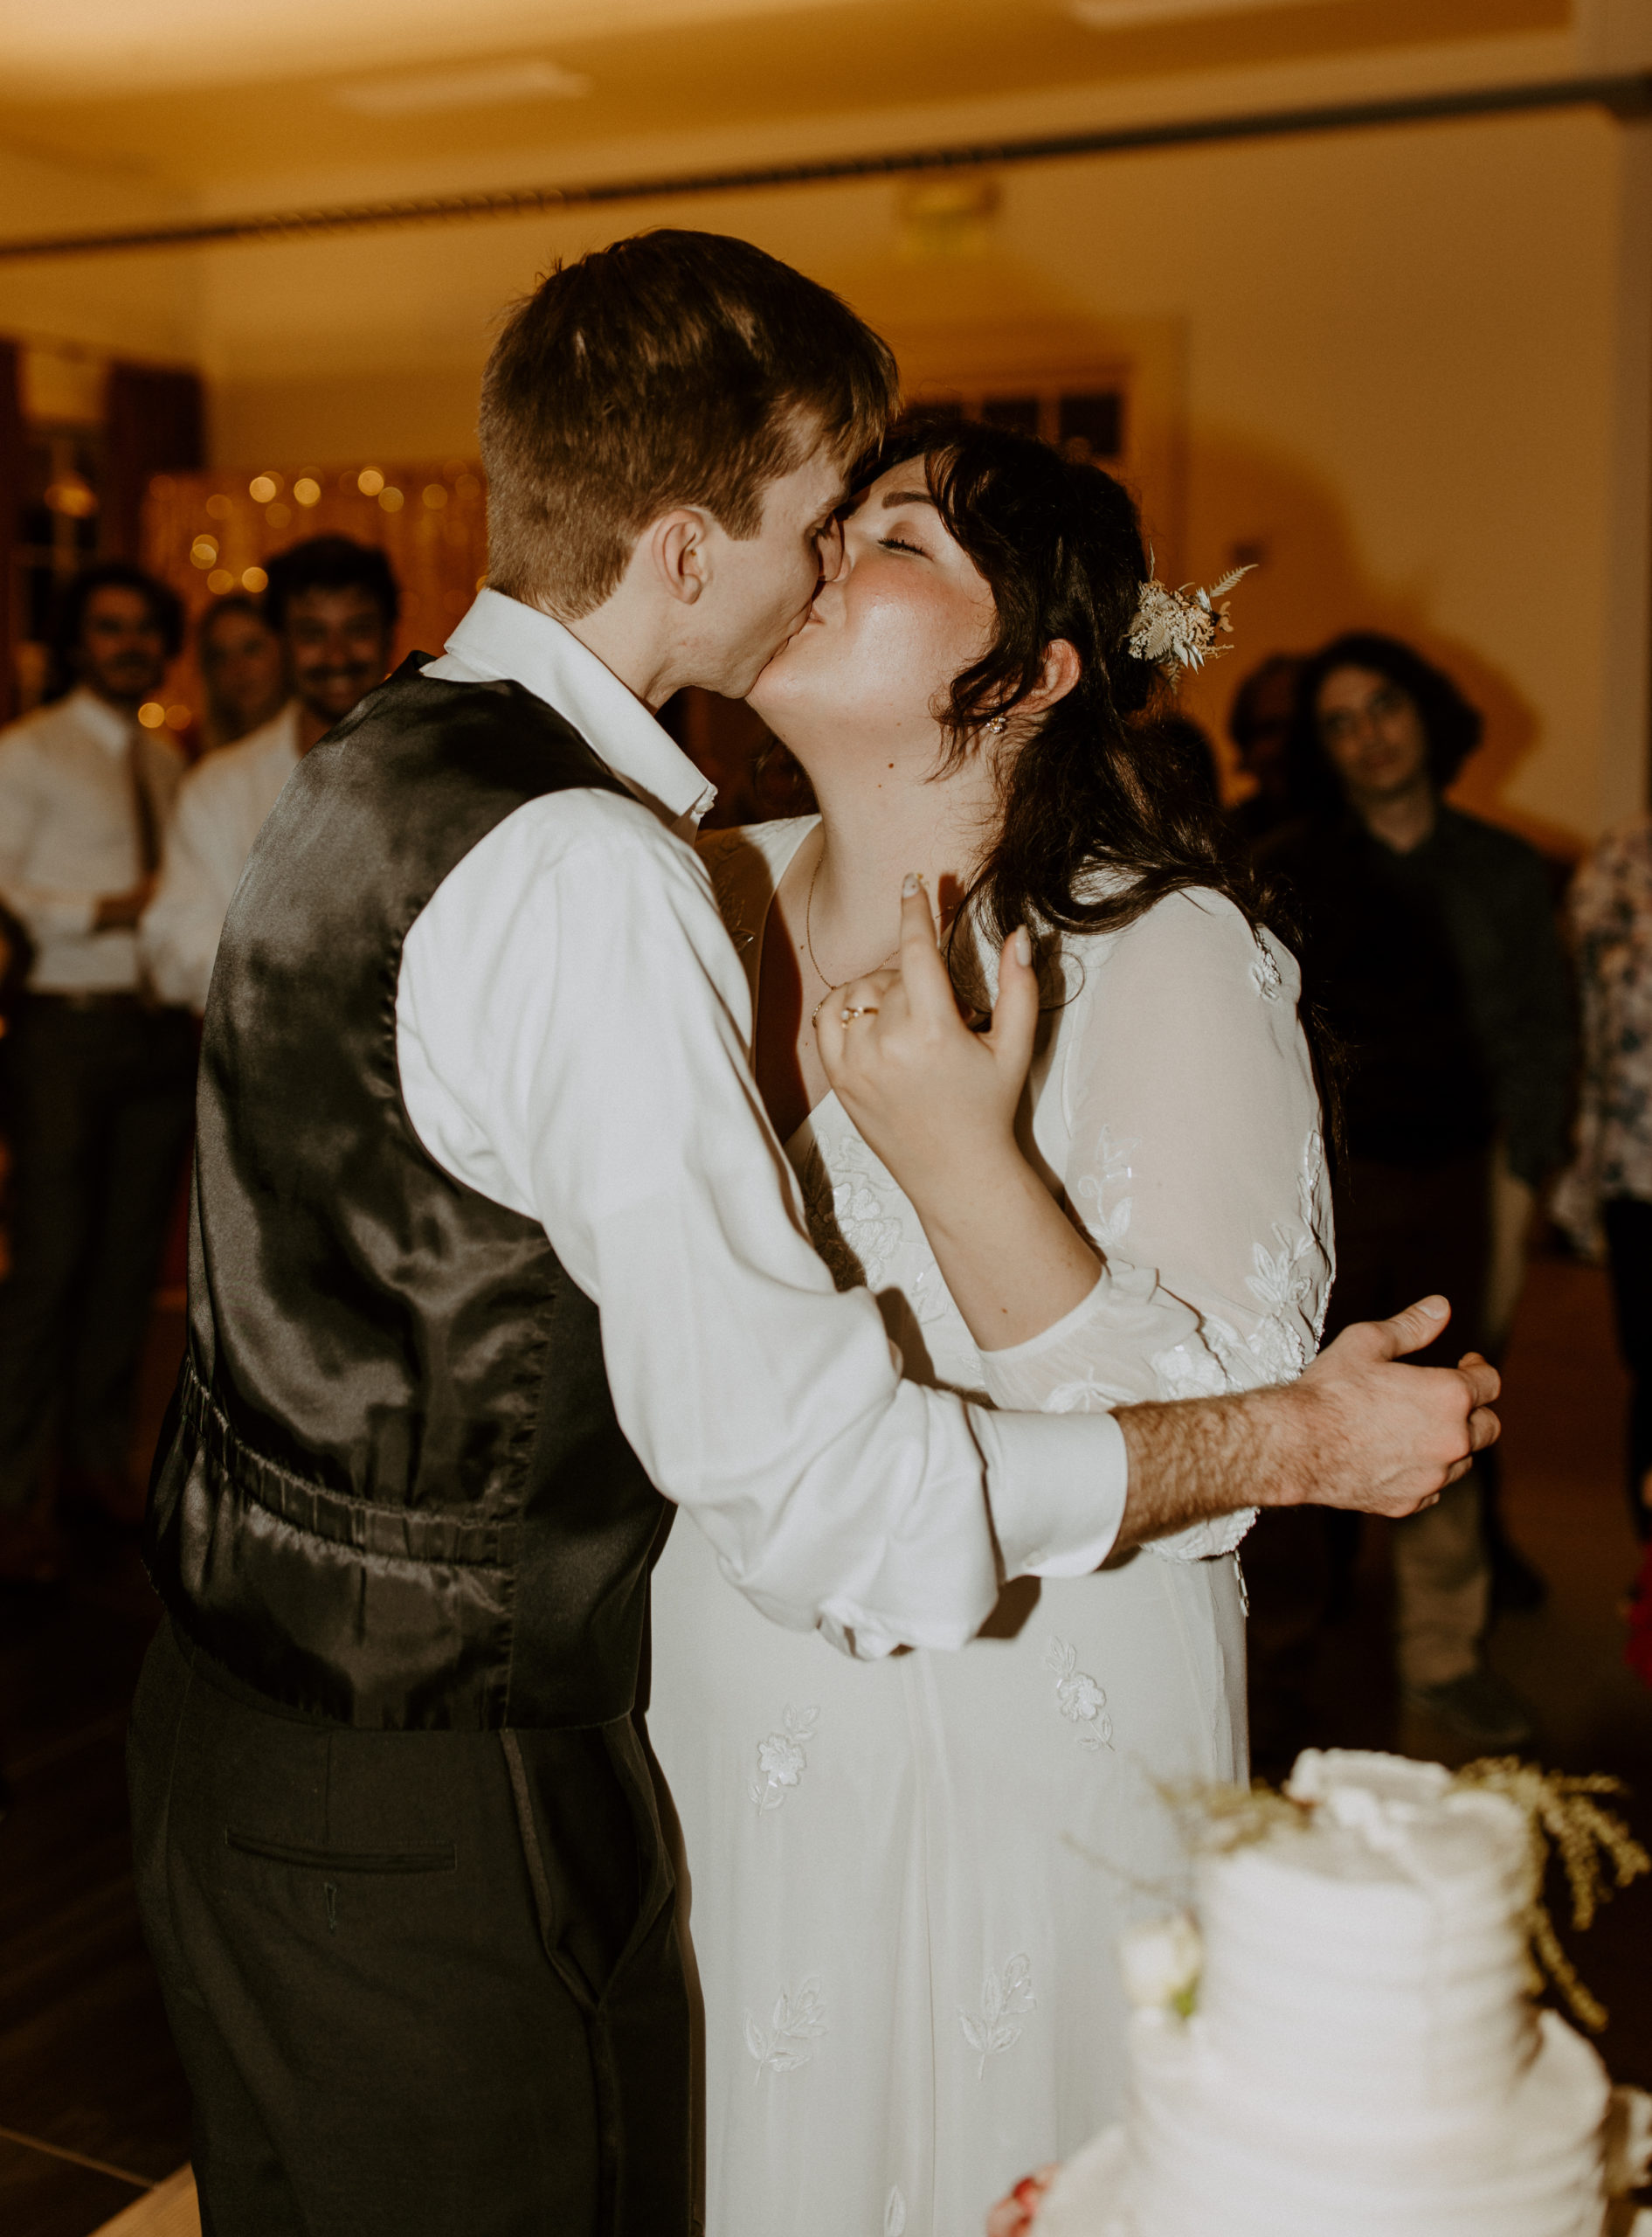 the couple kissing after cutting the cake